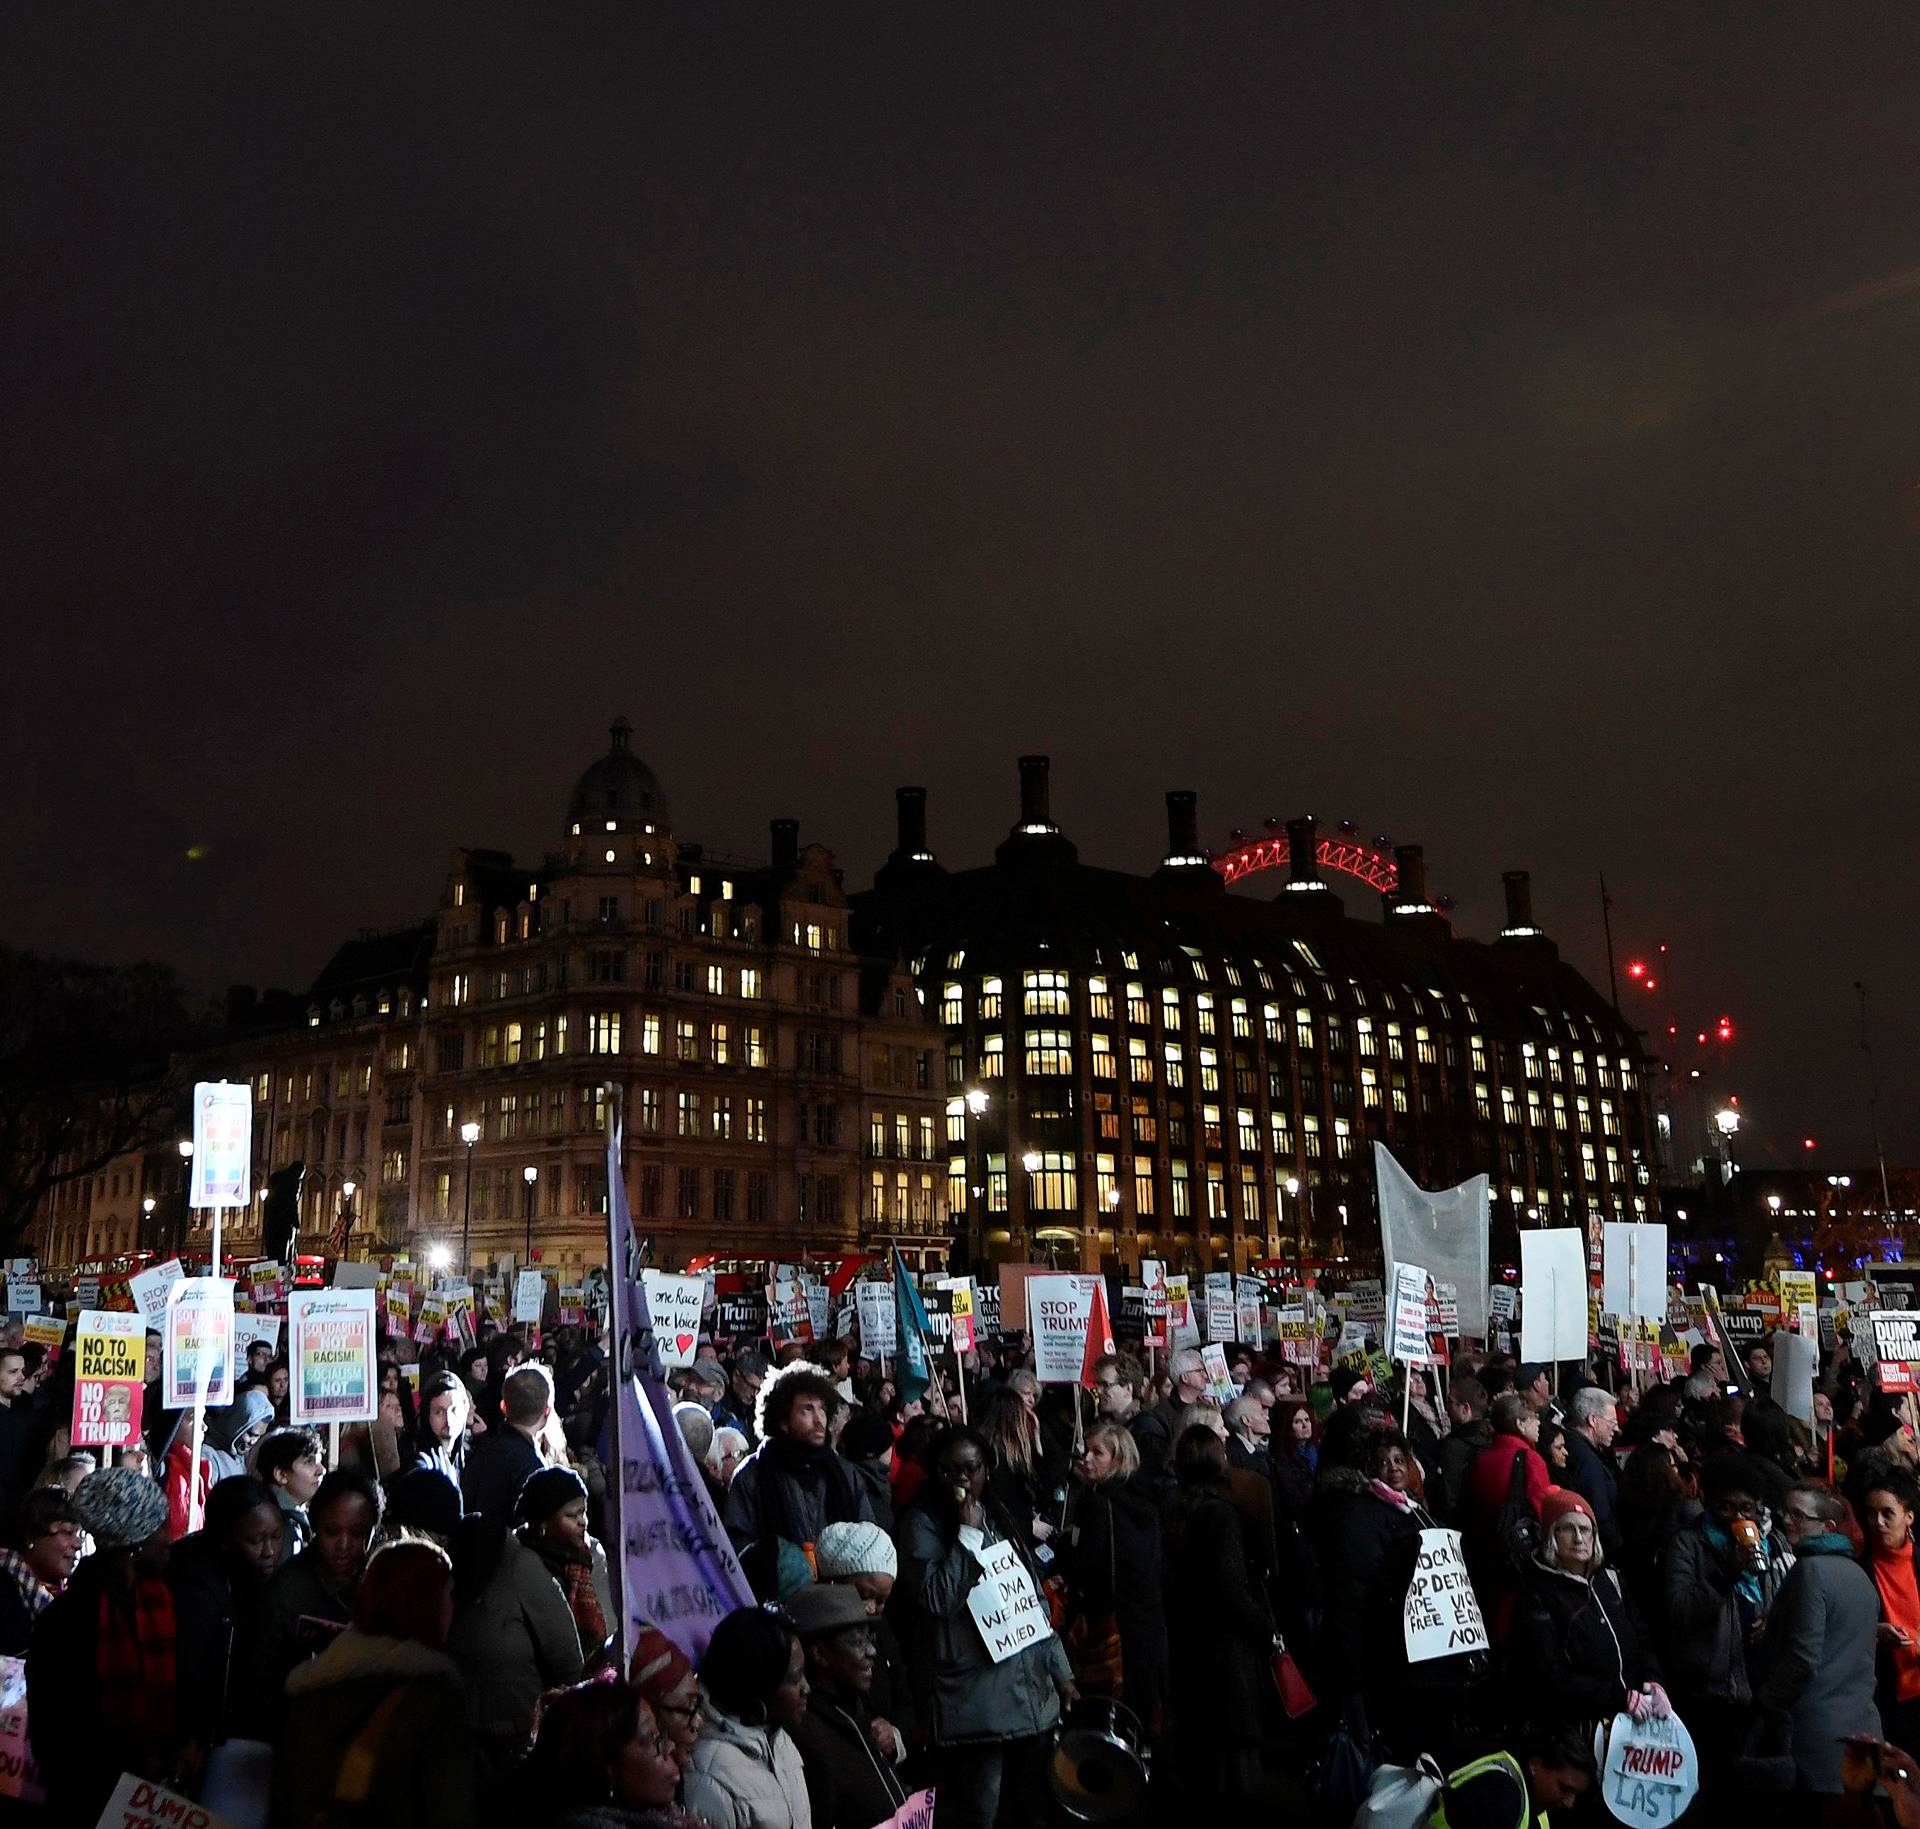 Demonstrators gather in front of the Houses of Parliament during a protest against U.S. President Donald Trump in London